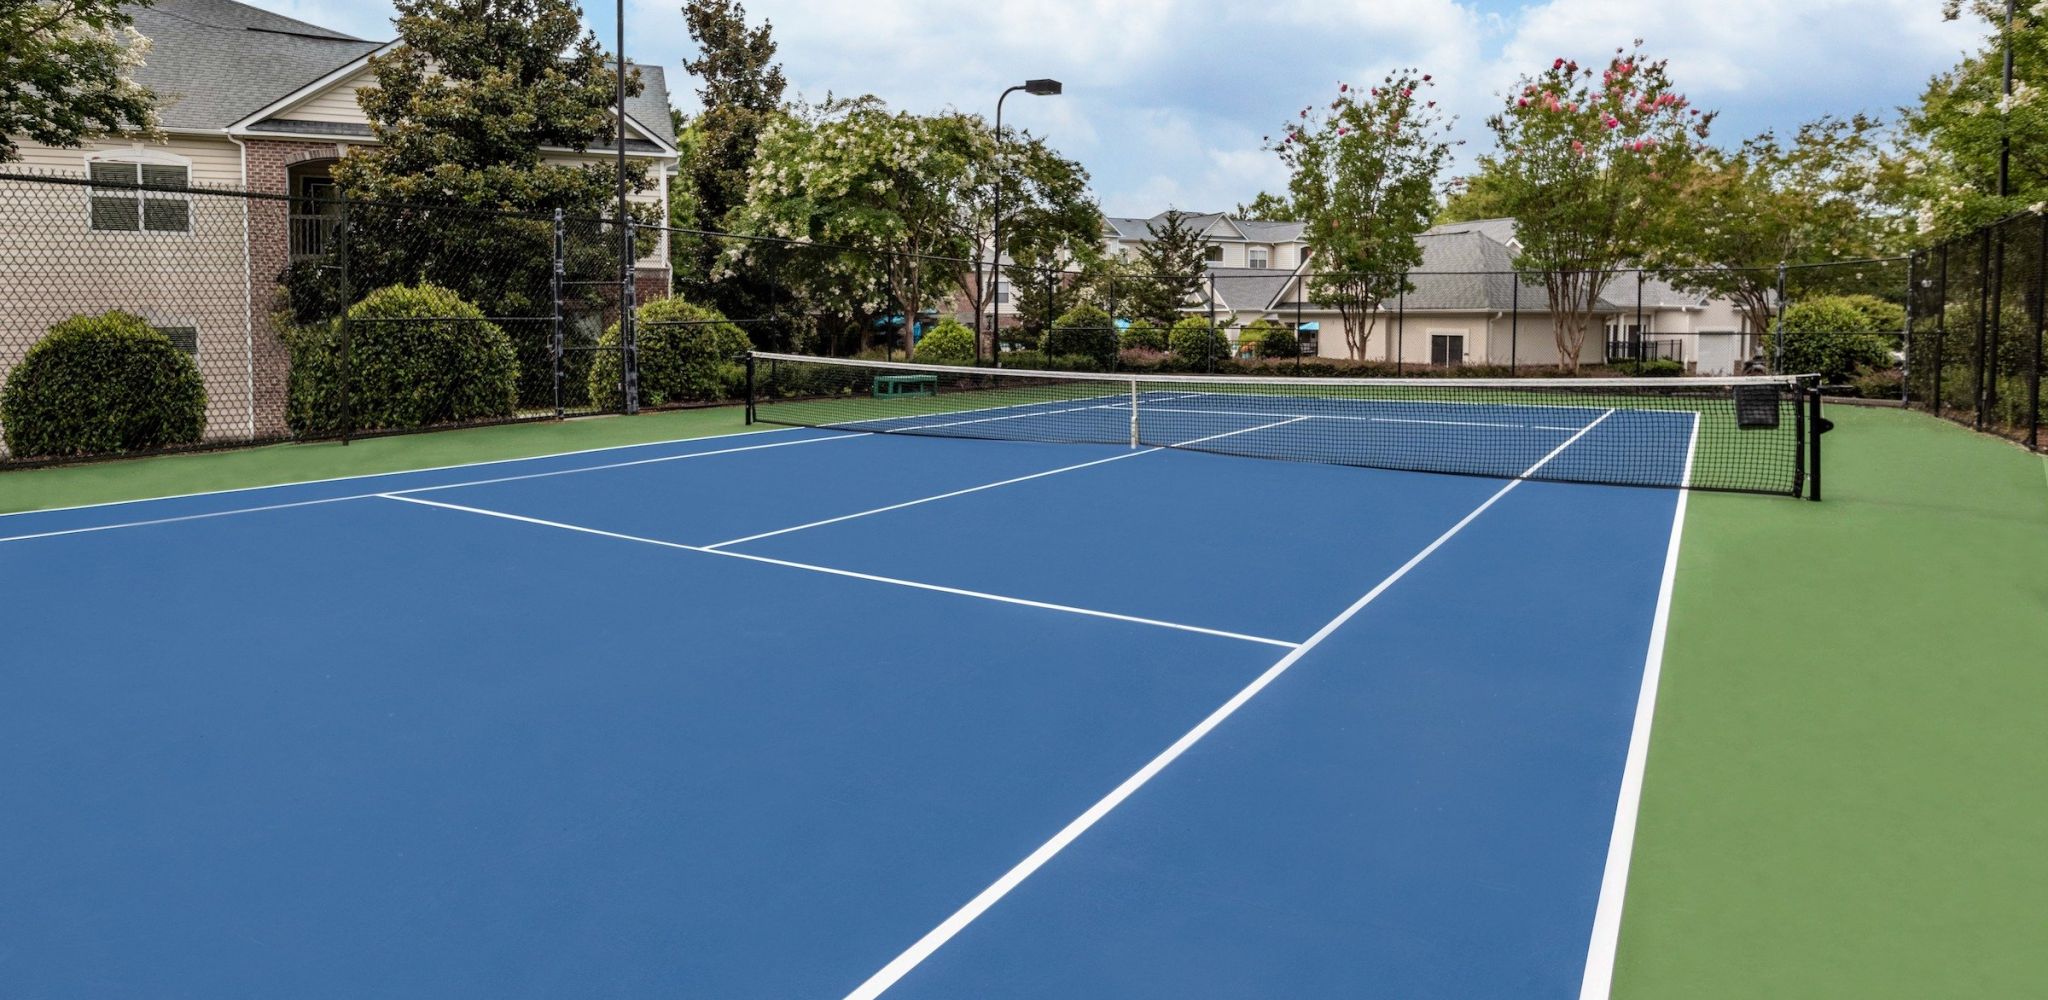 Hawthorne at Kennesaw outdoor tennis court and surrounding landscaping